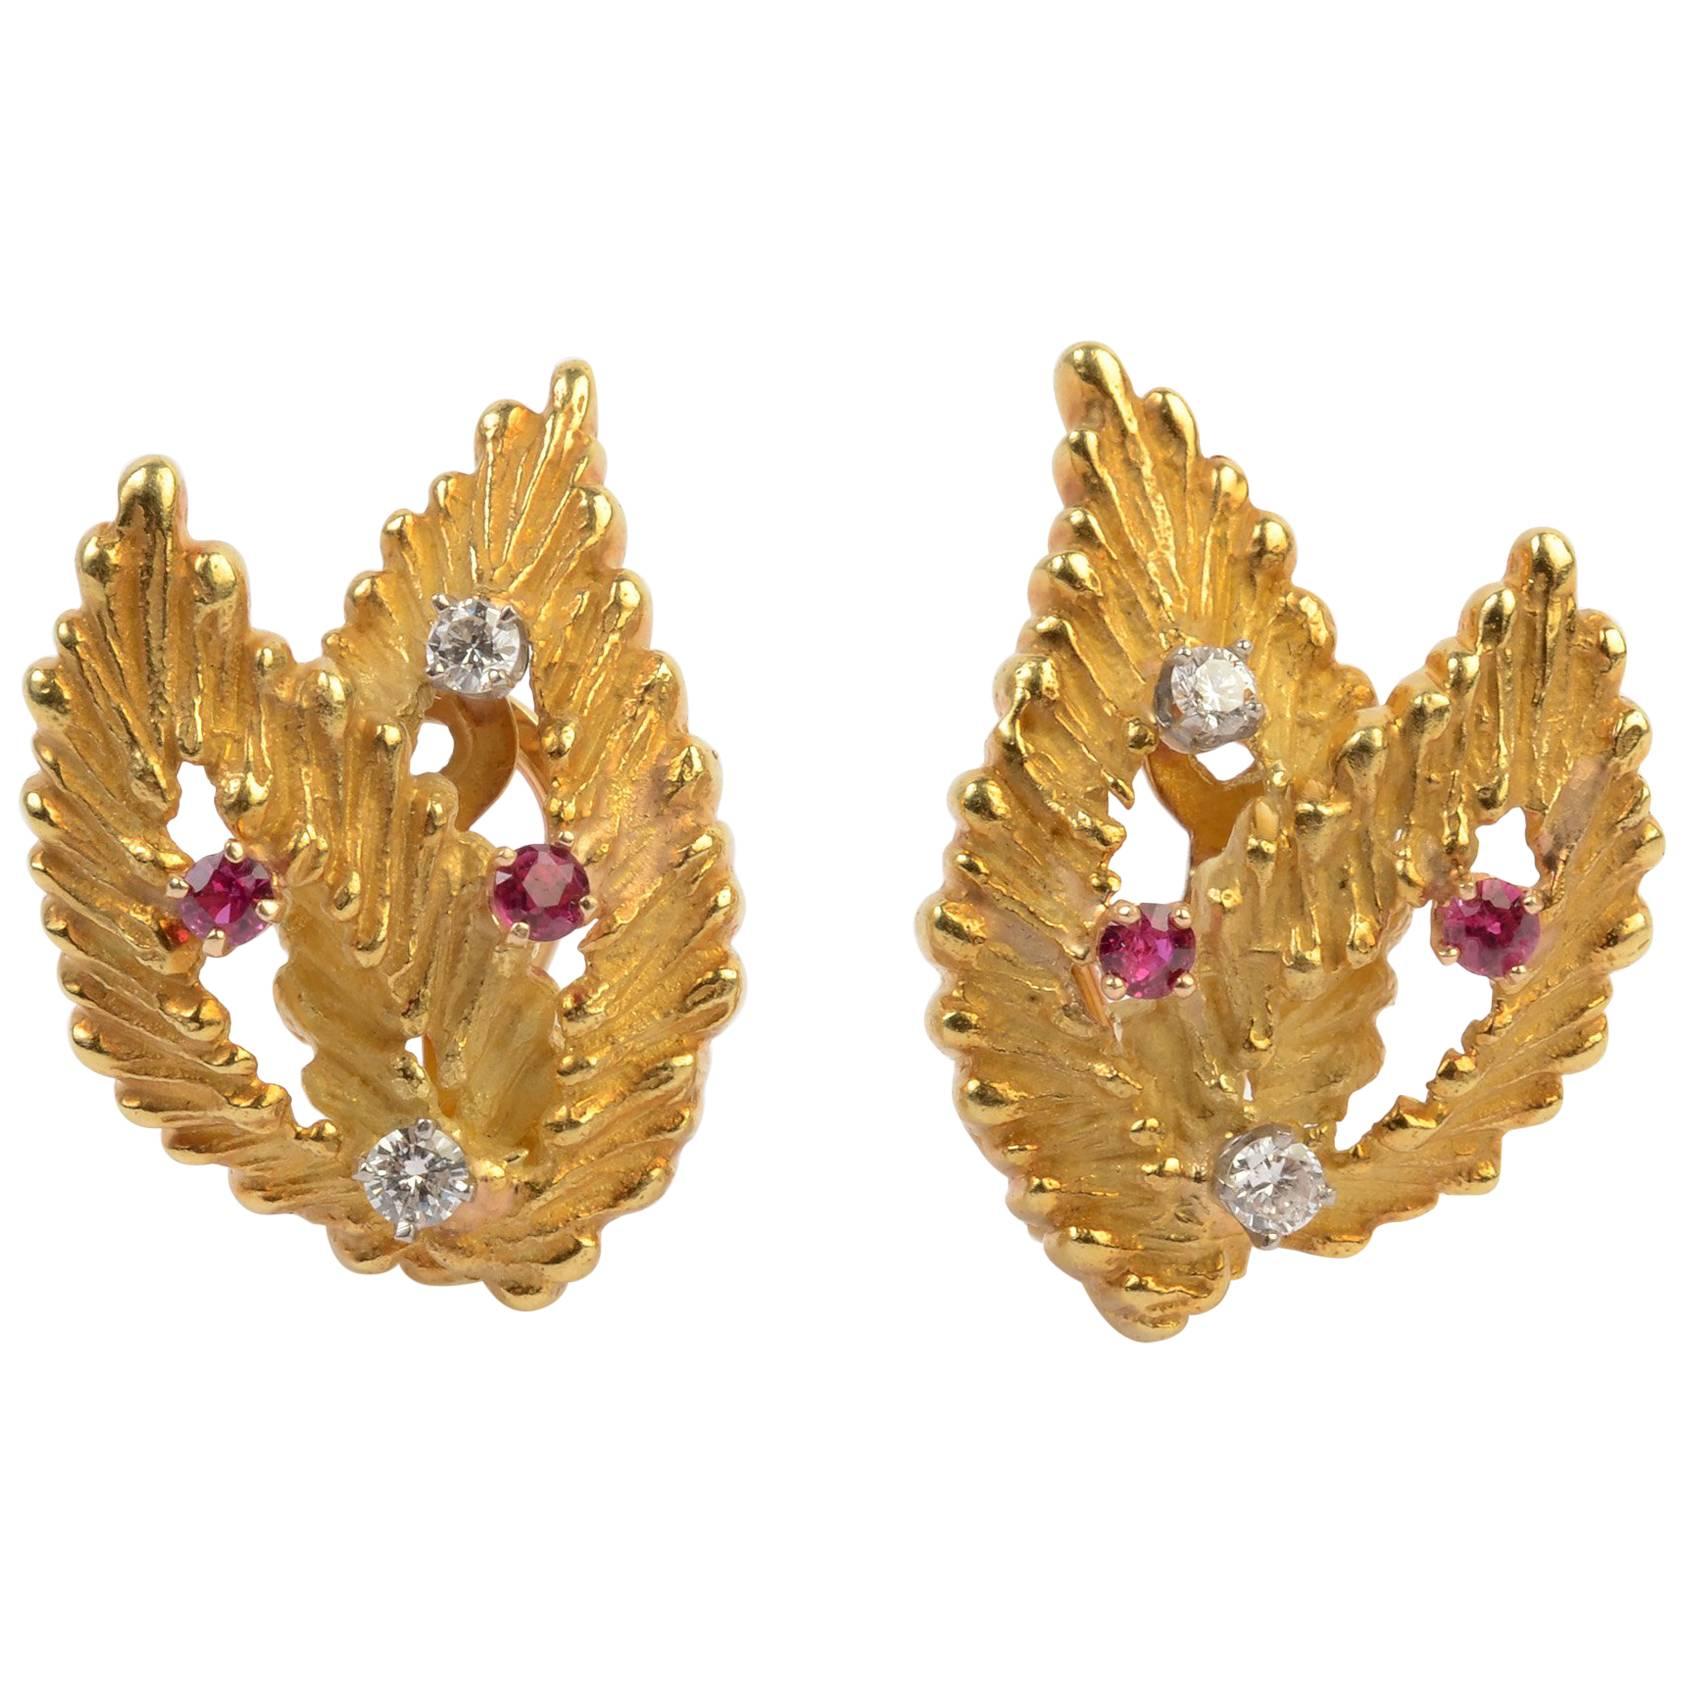 Gold Leaf Earrings with Diamonds and Rubies